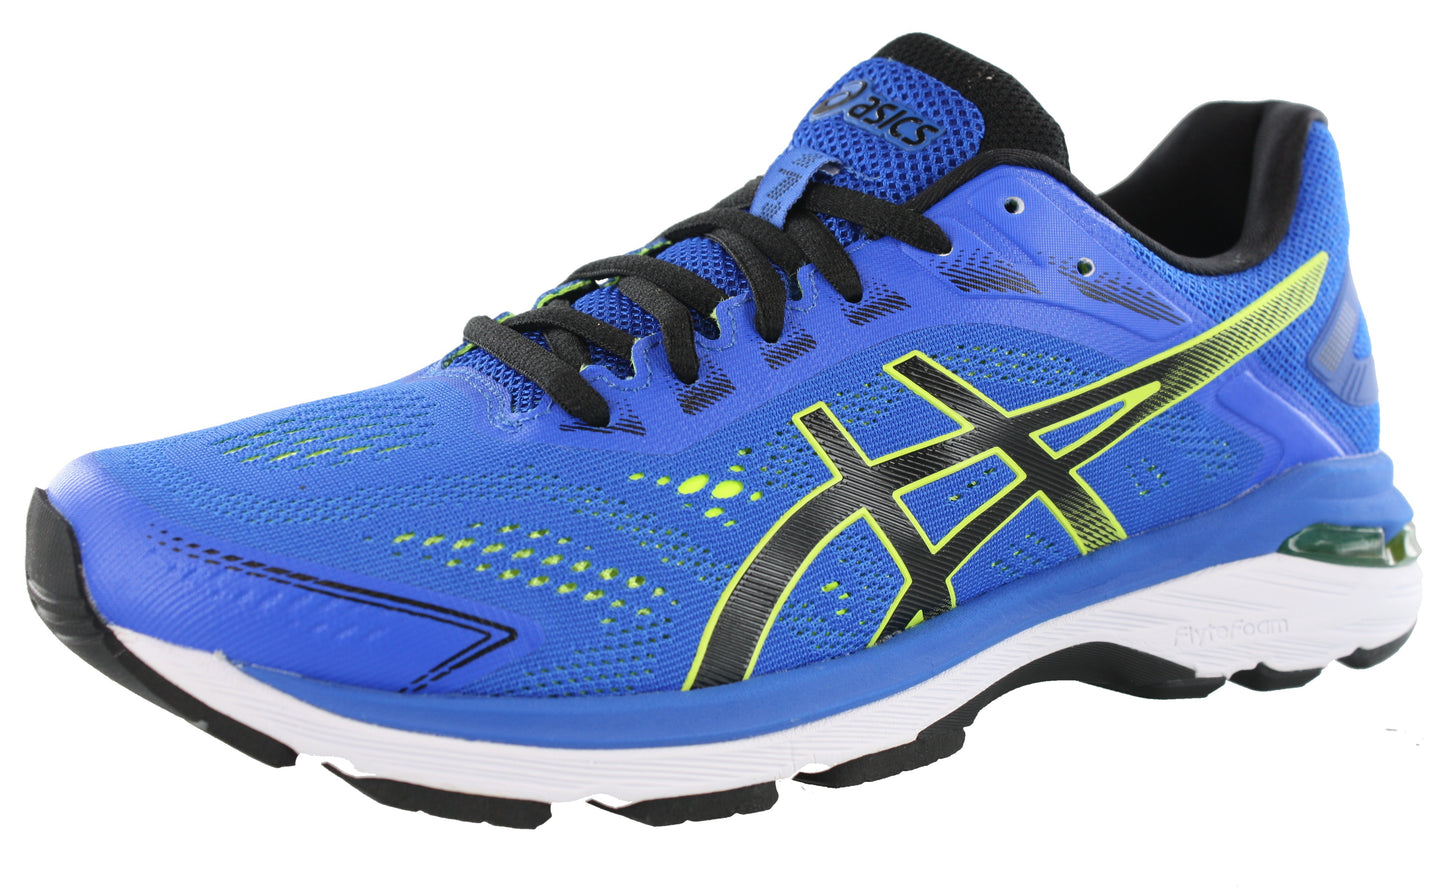 
                  
                    Lateral of Illusion Blue with Black and Yellow accents ASICS Men Walking Trail Cushioned Running Shoes GT 2000 7
                  
                